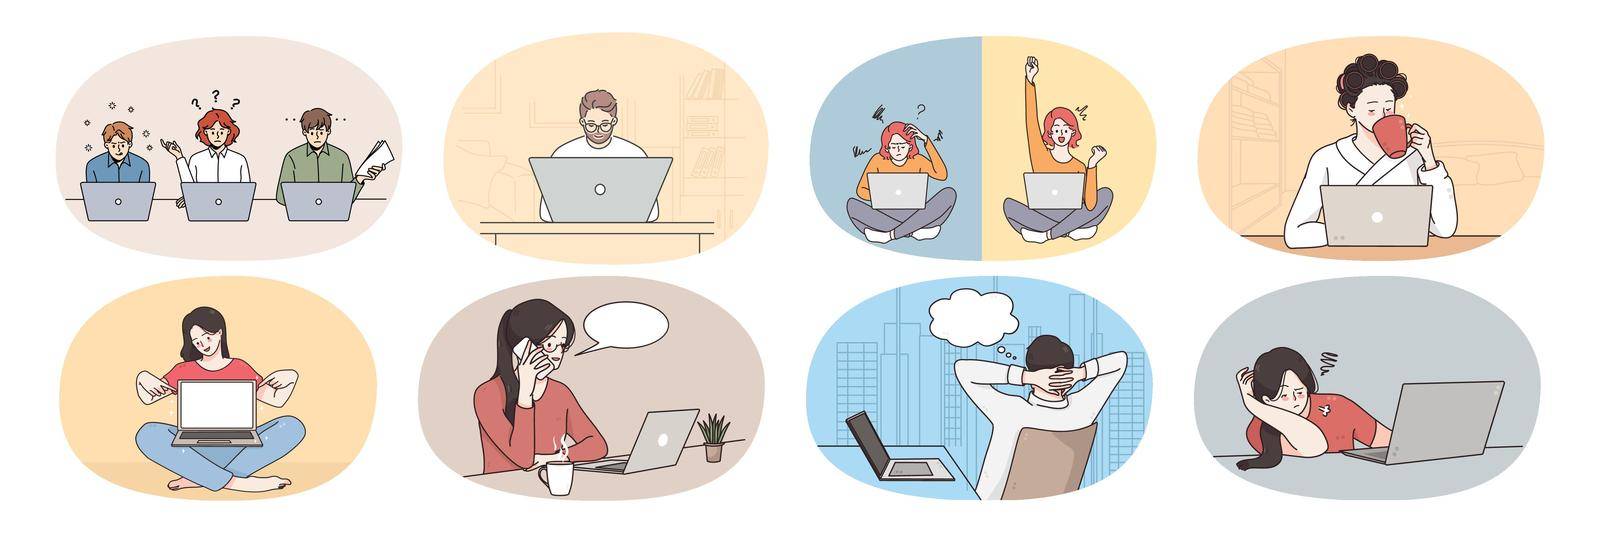 Collection of young people use computer communicate online on gadget. Set of men and women study on web, browse internet on laptop or surf social medial. Flat vector illustration.